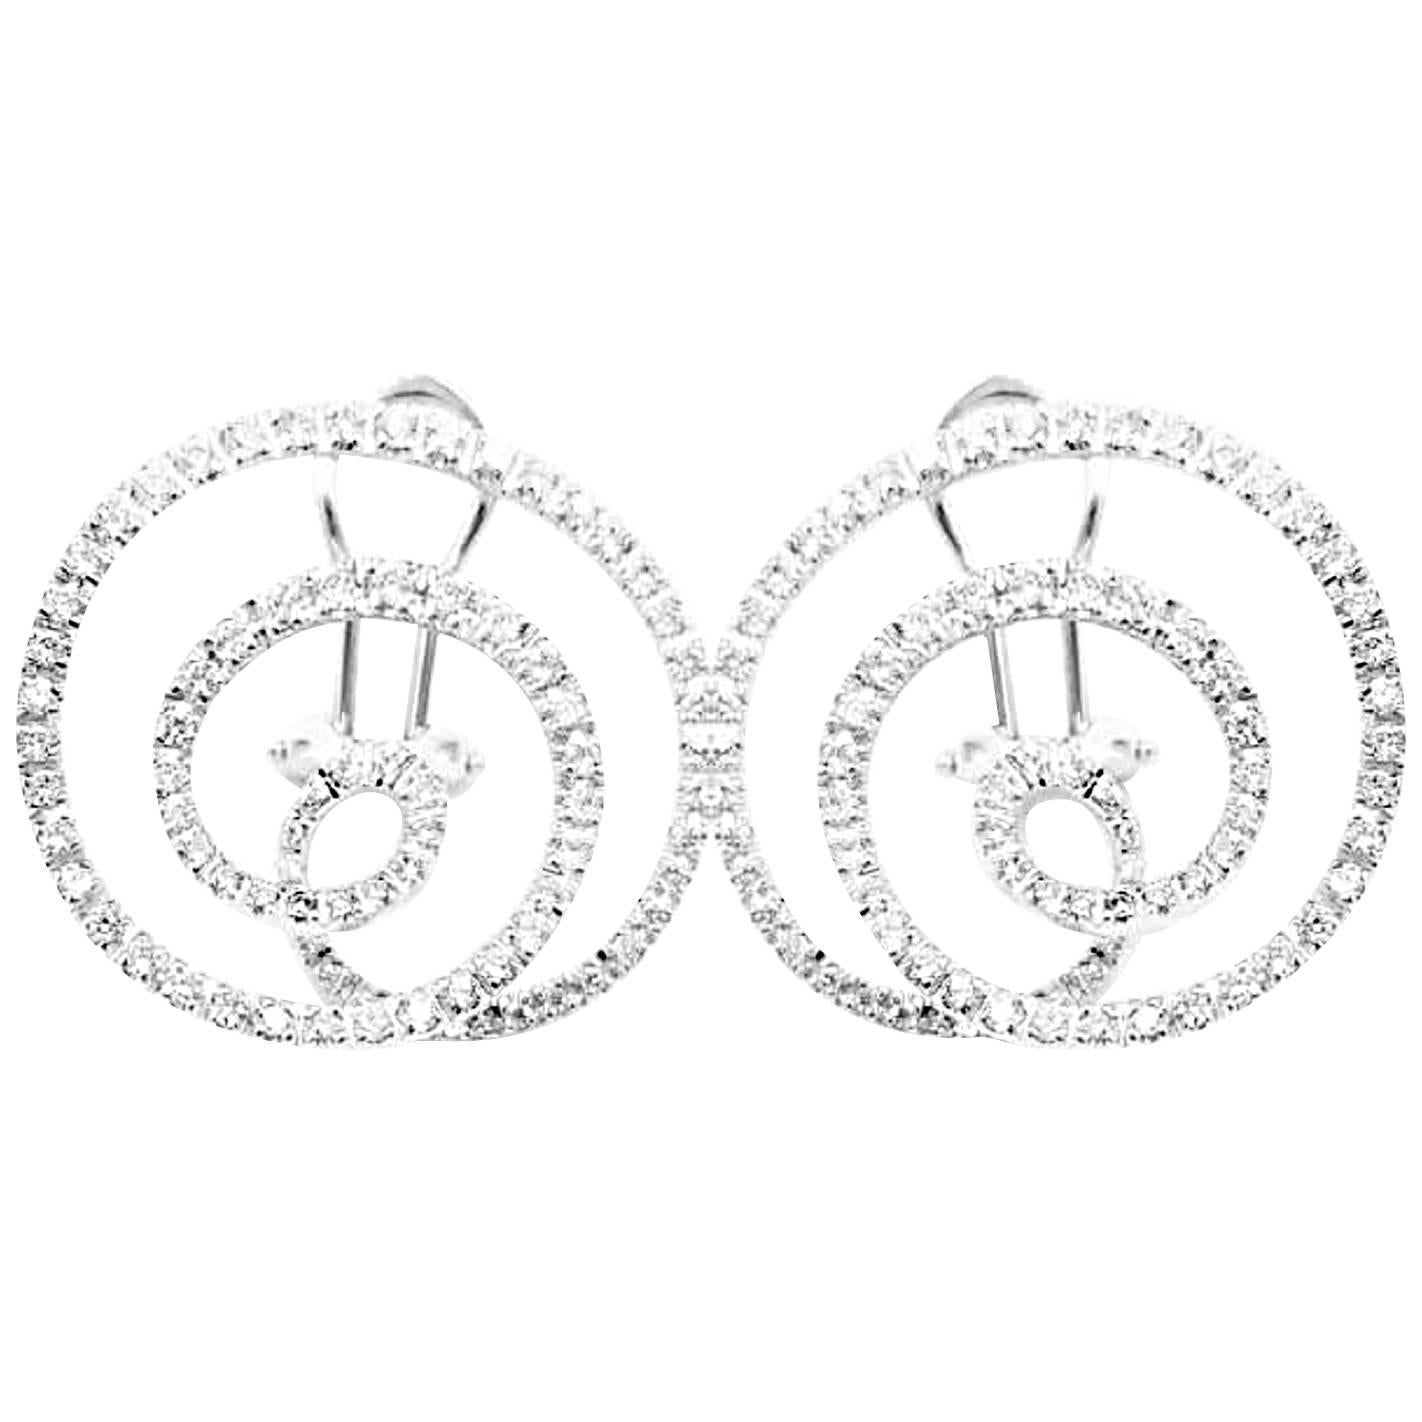 Tous Lyra Italy Swirl 3.50 Carats of Diamonds Set in 18kt White Gold Earrings For Sale